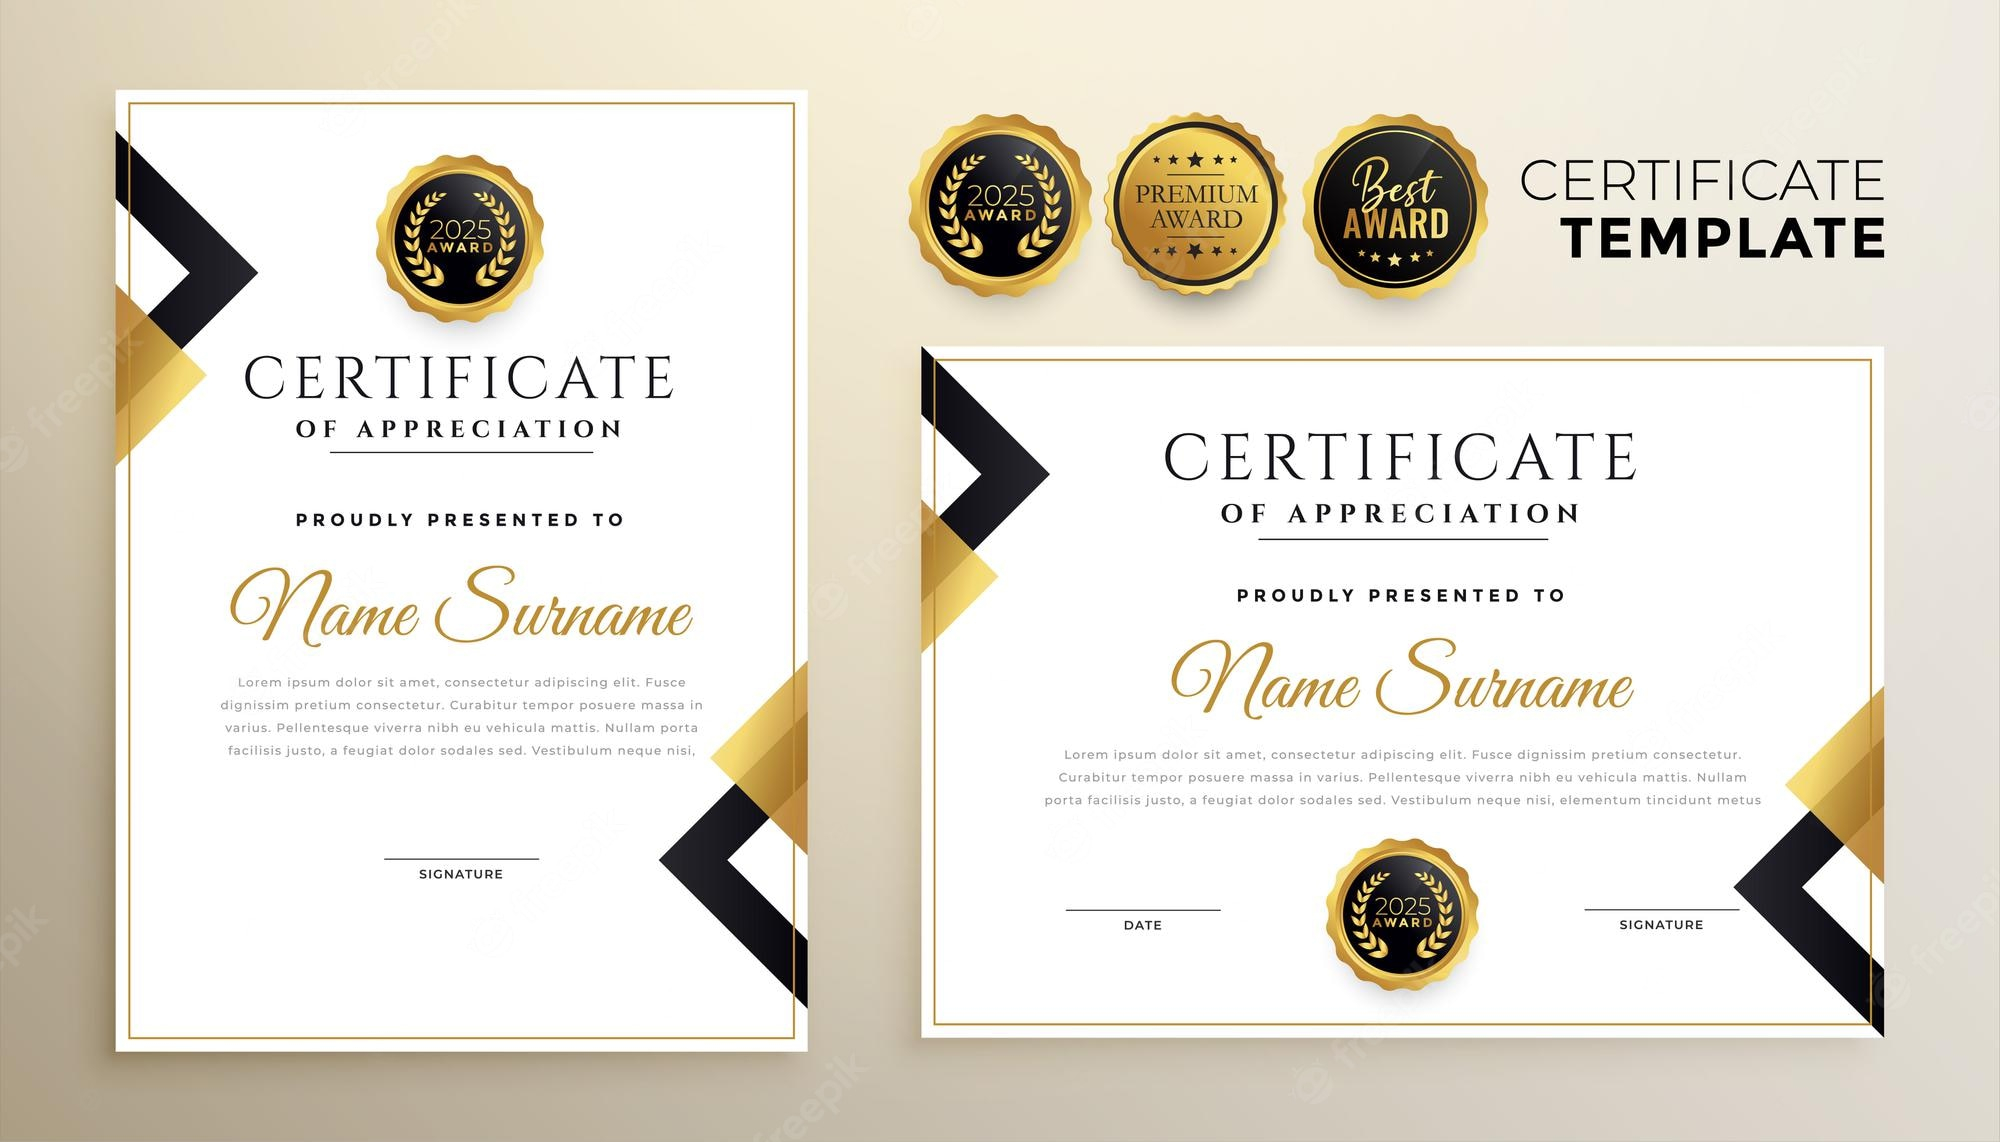 Certificate template Vectors & Illustrations for Free Download  Intended For Beautiful Certificate Templates